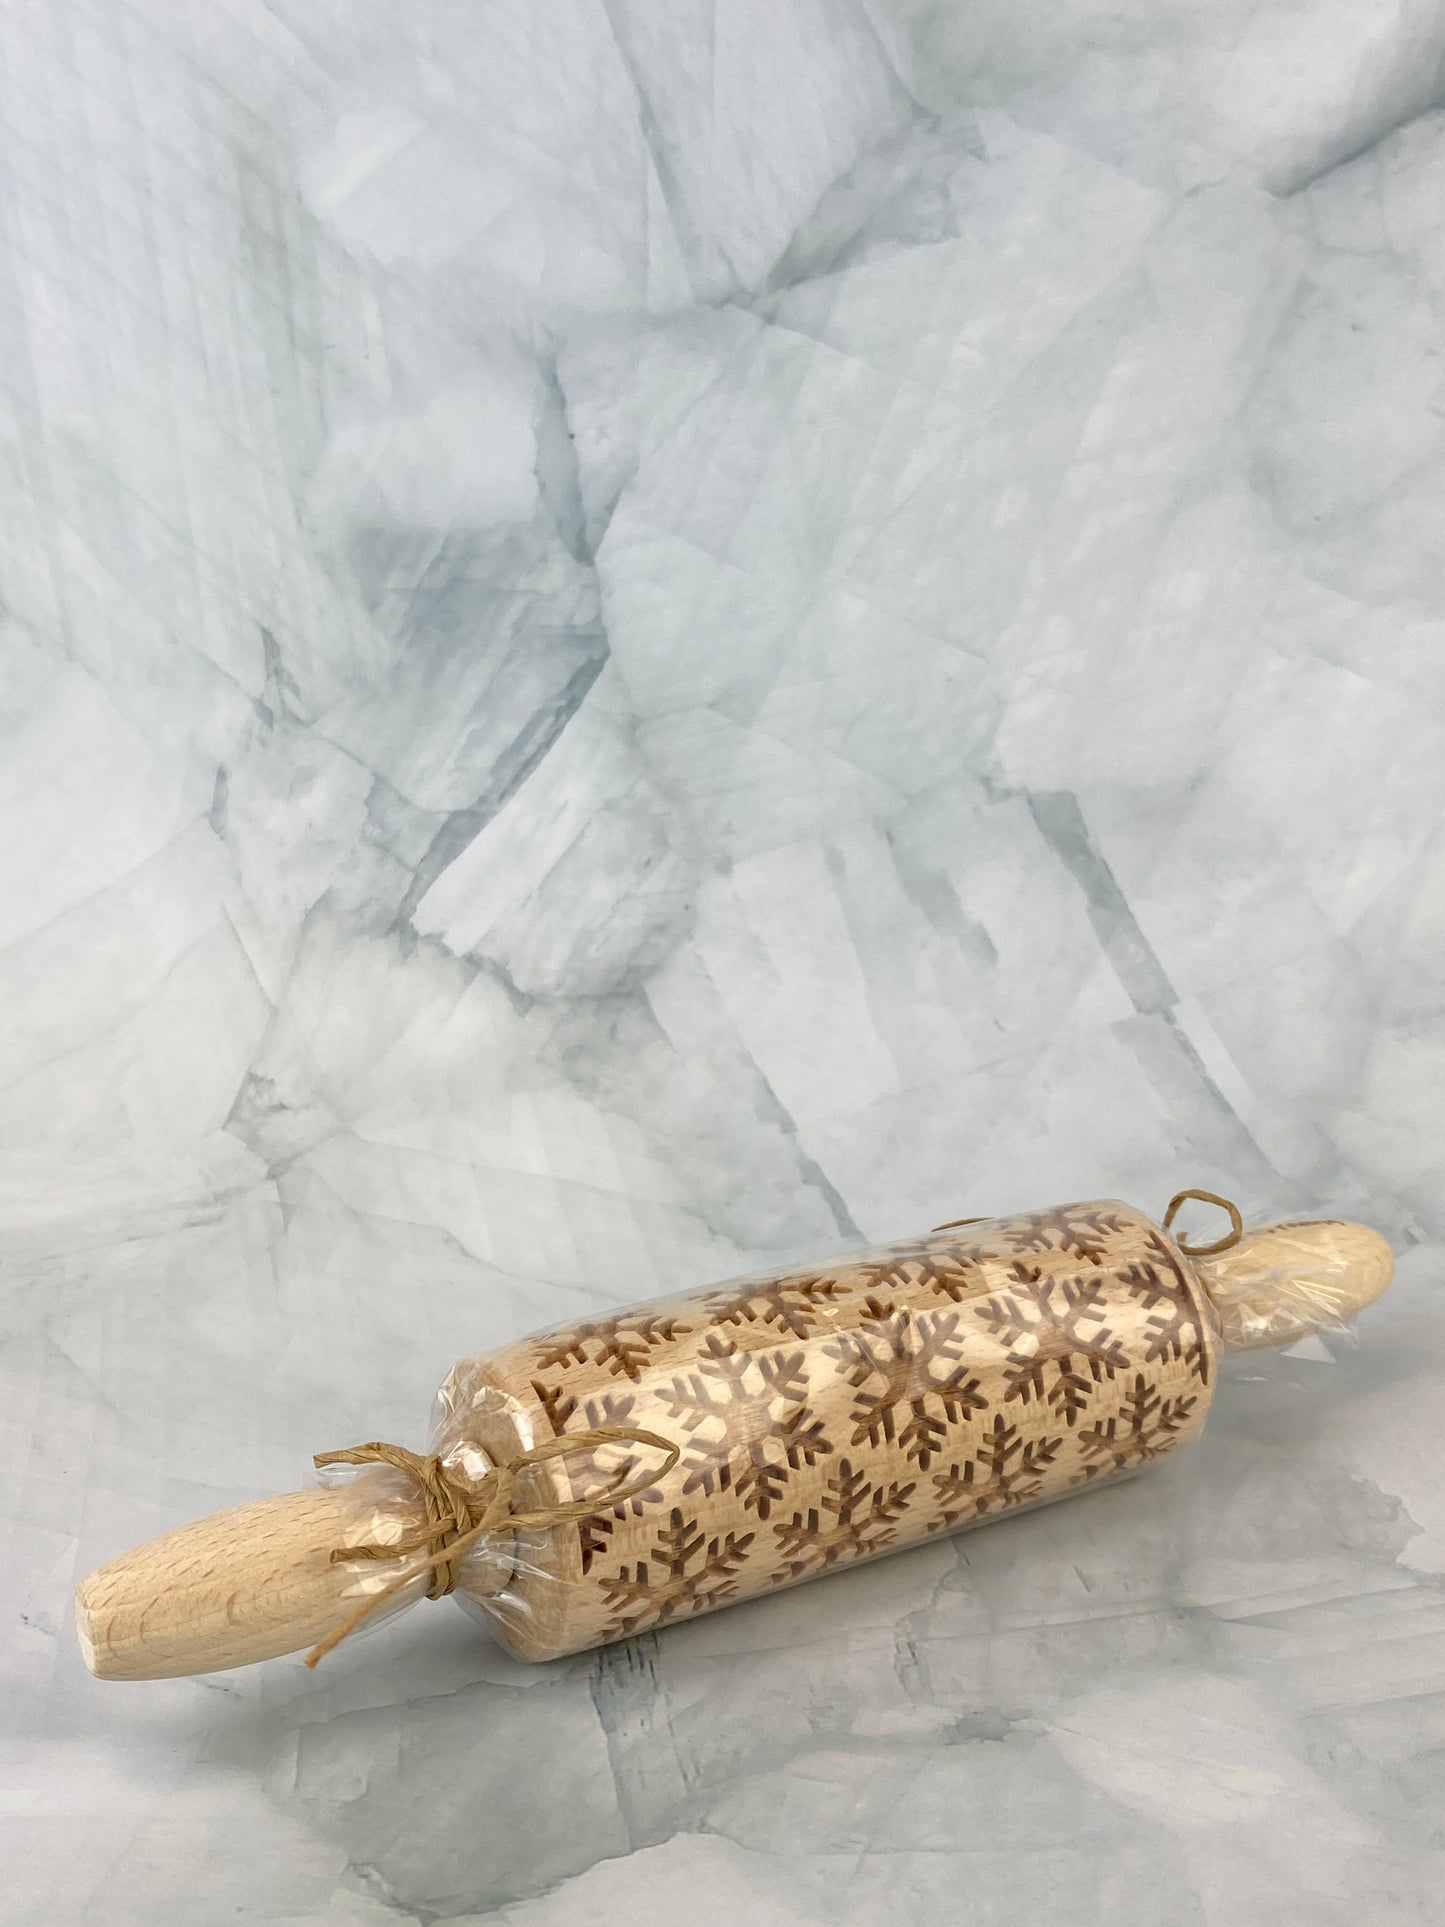 Wooden Holiday Rolling Pin - Heavy Snowfall